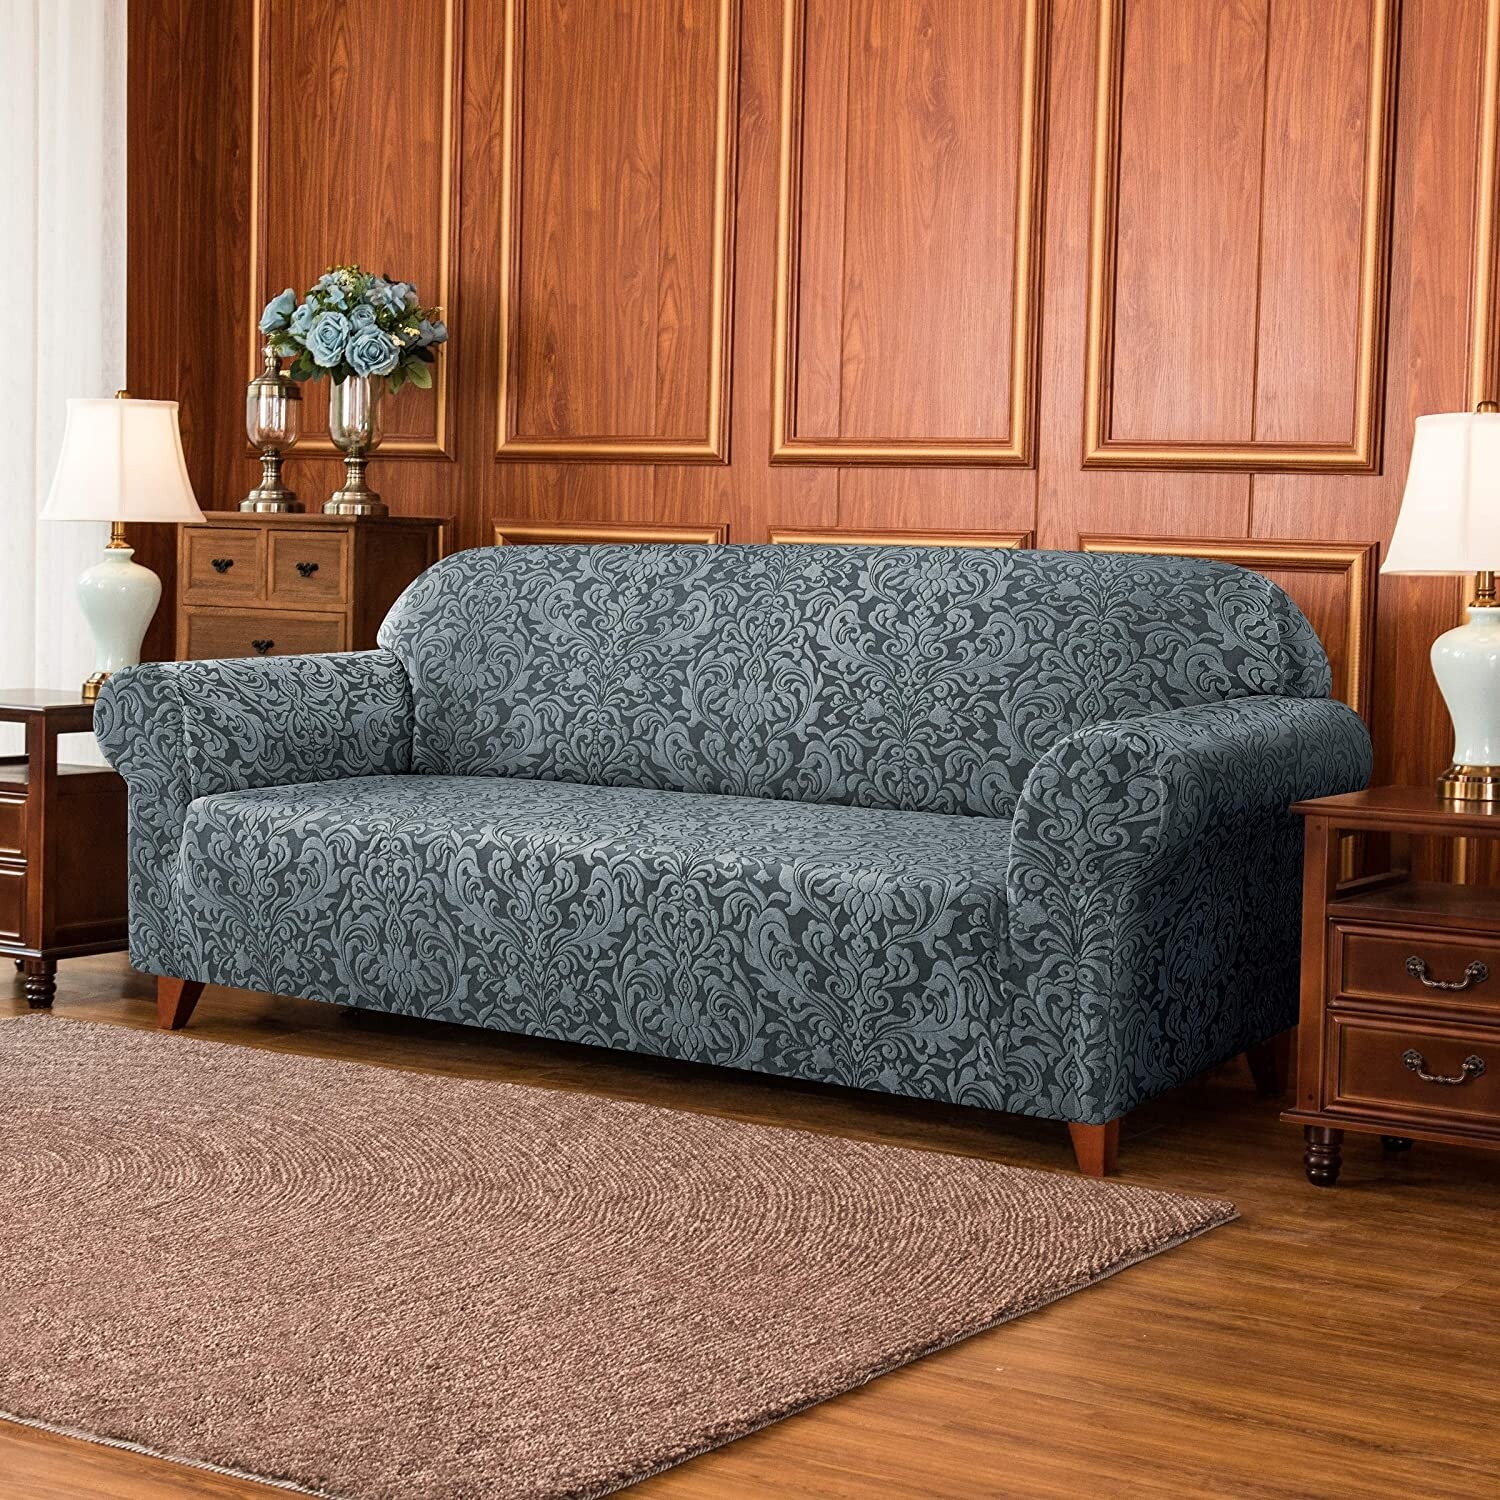 https://ak1.ostkcdn.com/images/products/is/images/direct/d0457fb80a671fe39b5ae2f0df69ba39a37bc705/Subrtex-1-Piece-4-Seat-Sofa-Slipcover-Jacquard-Damask-Stretch-Cover.jpg